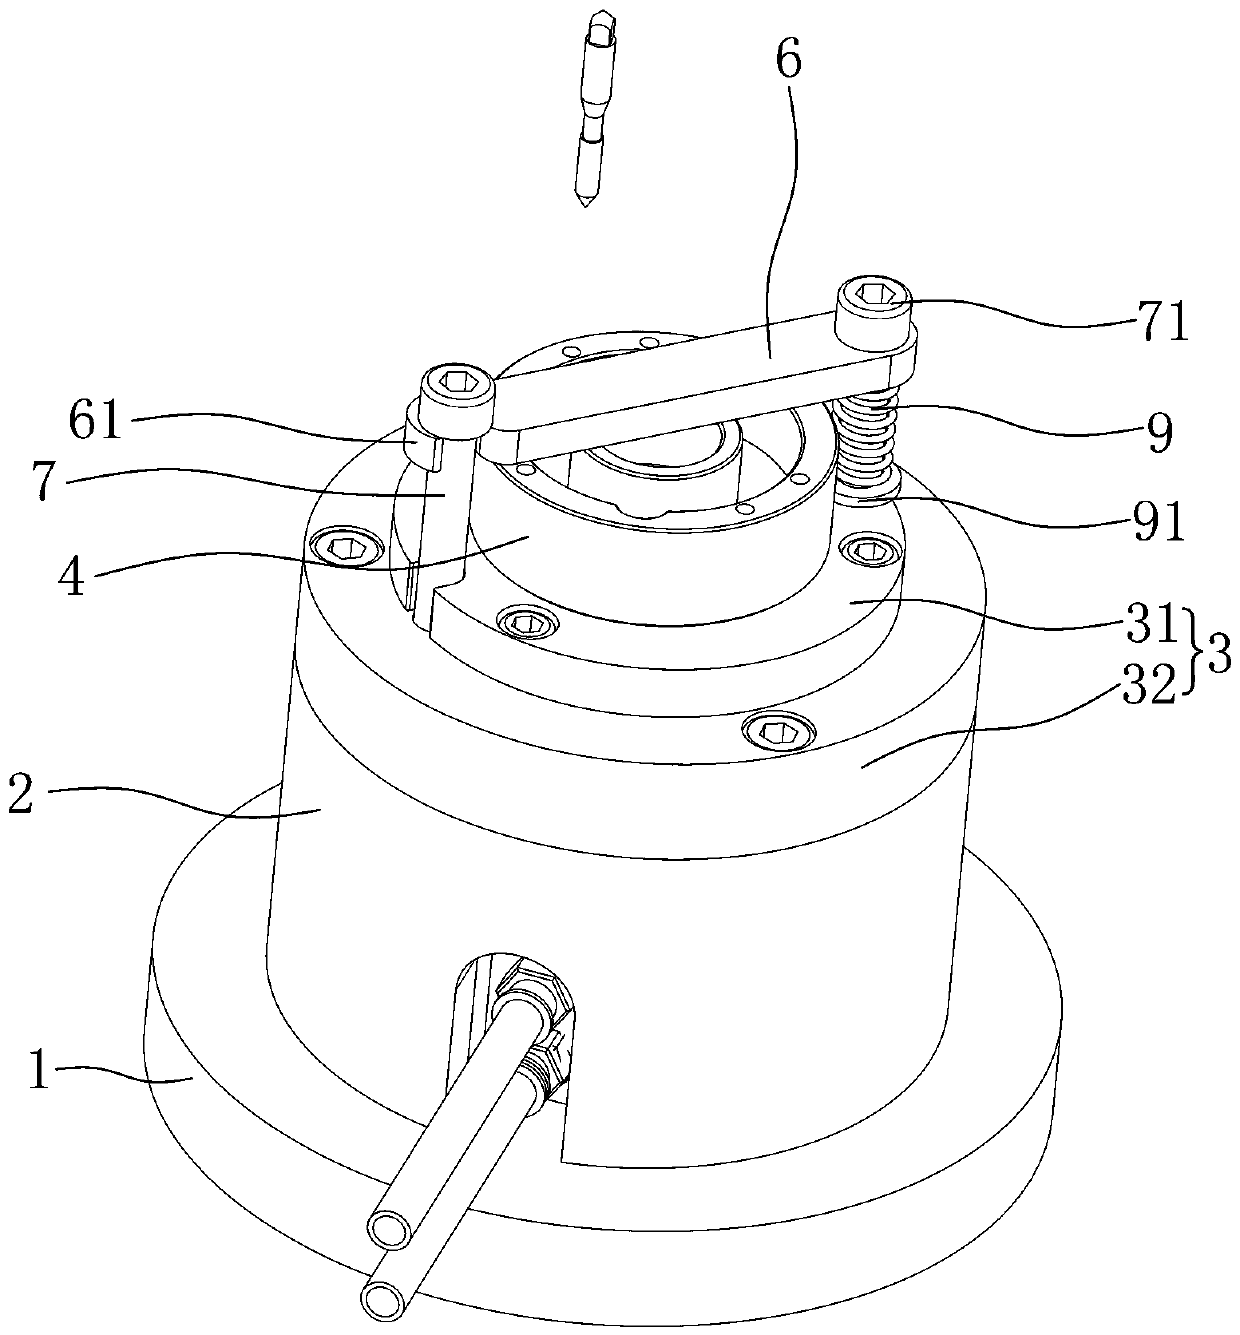 Disc-shaped workpiece tapping and locating clamp